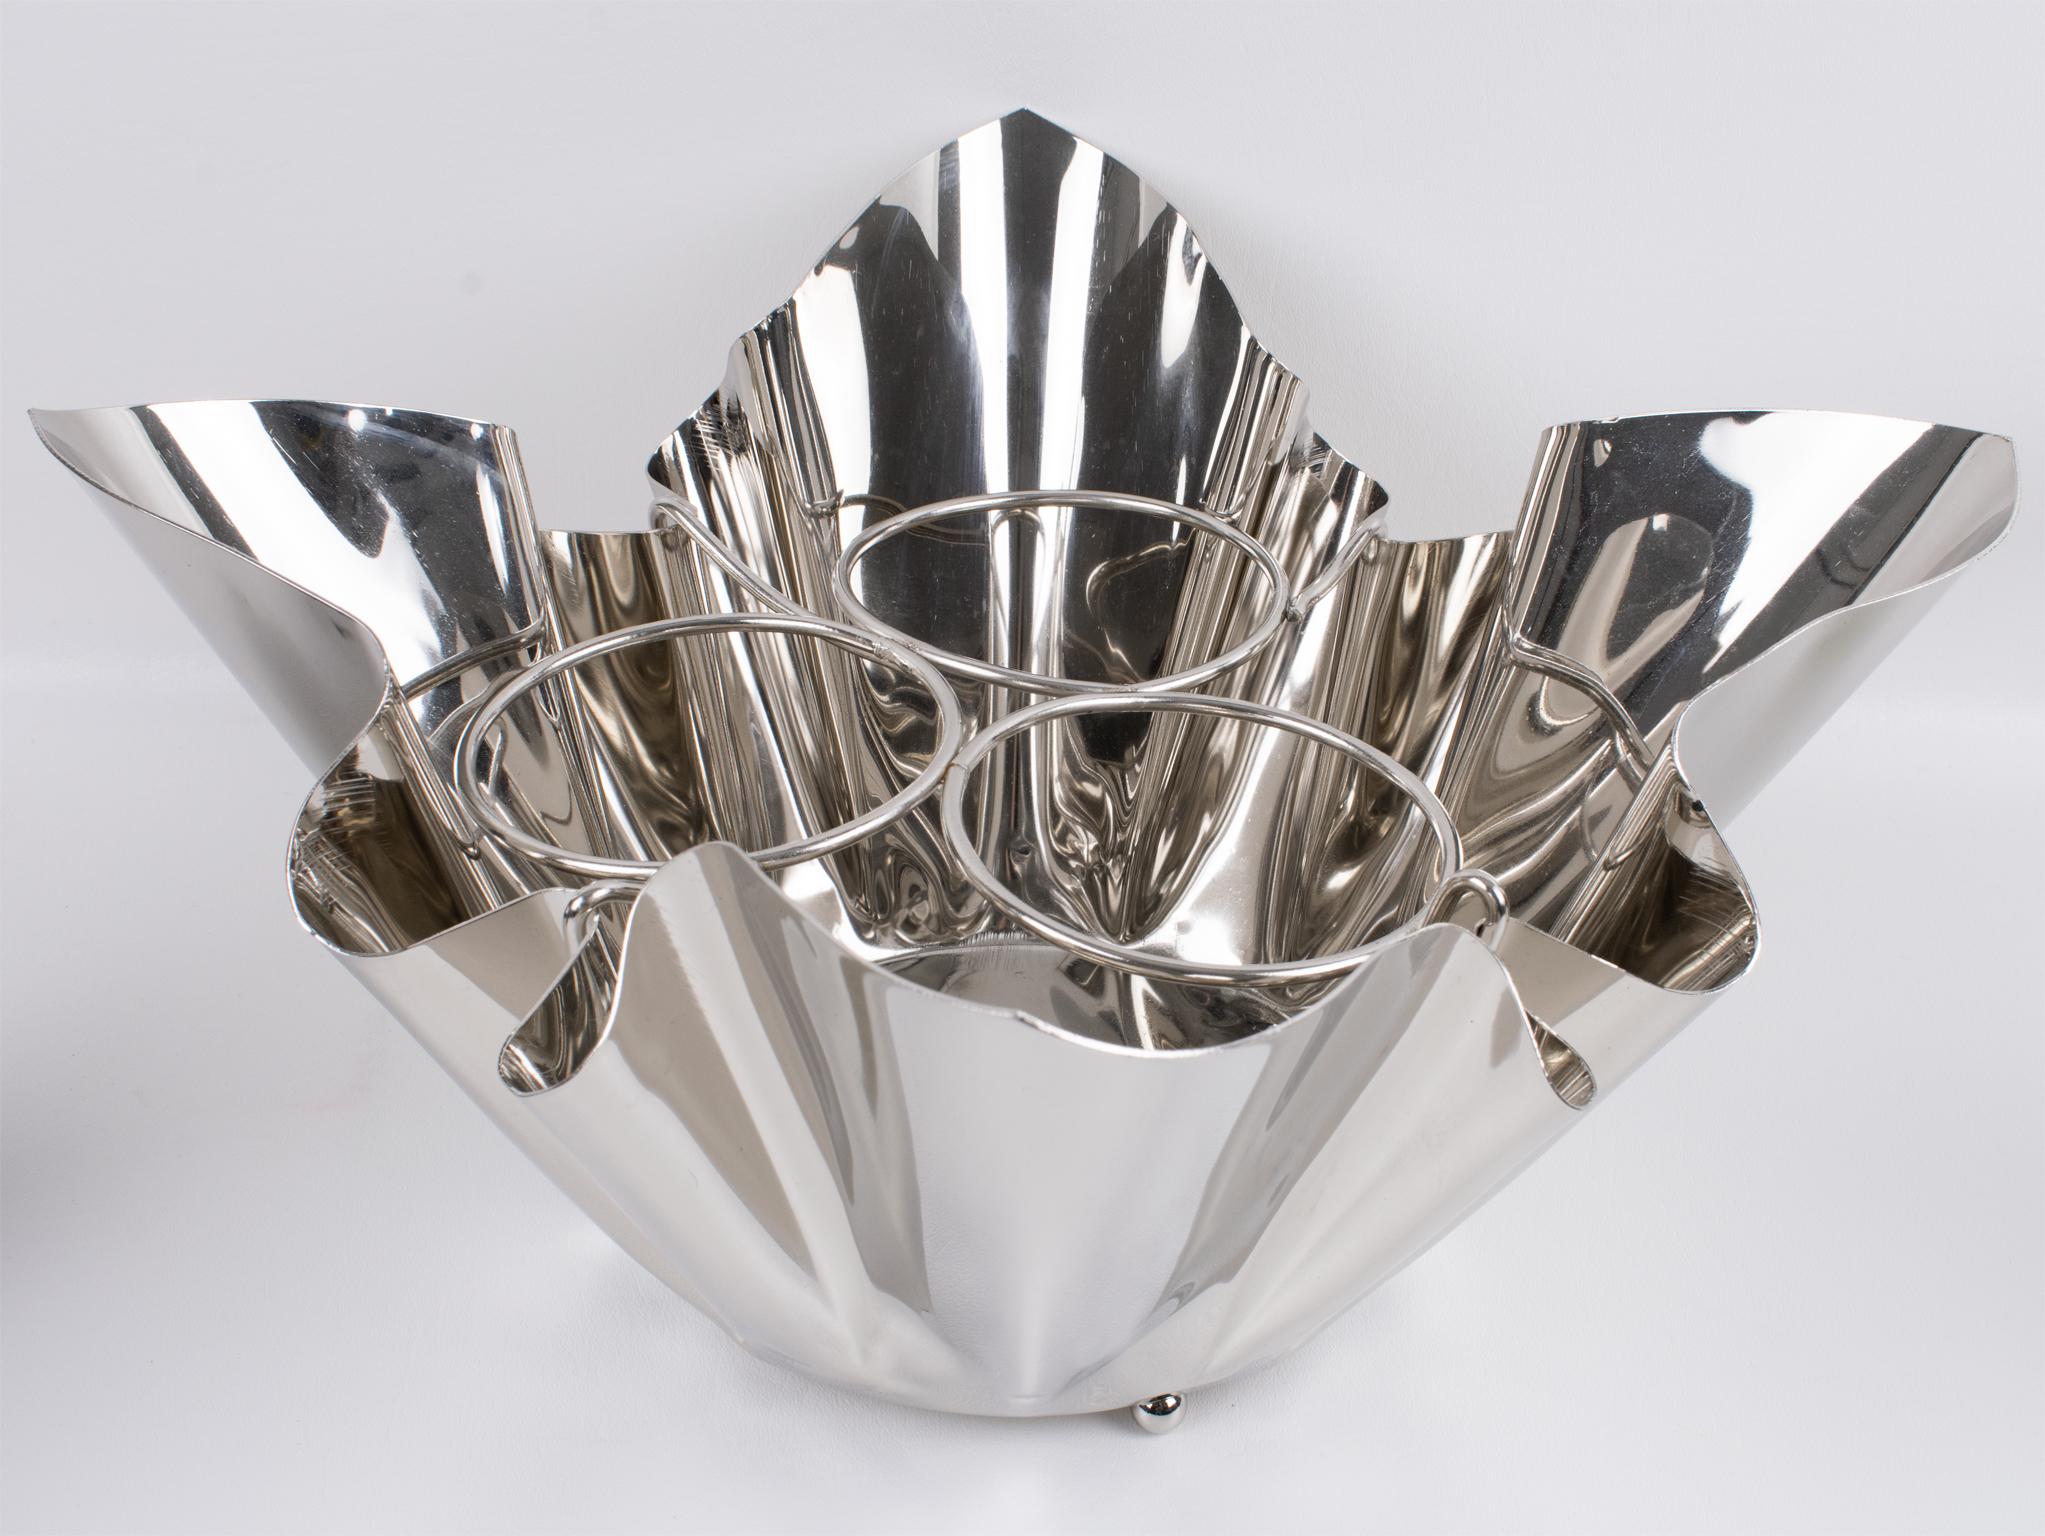 This stylish mid-century-modernist silver plate wine cooler or champagne ice bucket was crafted in France in the 1960s. This ultra-chic bottle holder features a whimsical handkerchief shape. It has a three-bottle capacity. Willy Guhl also used this